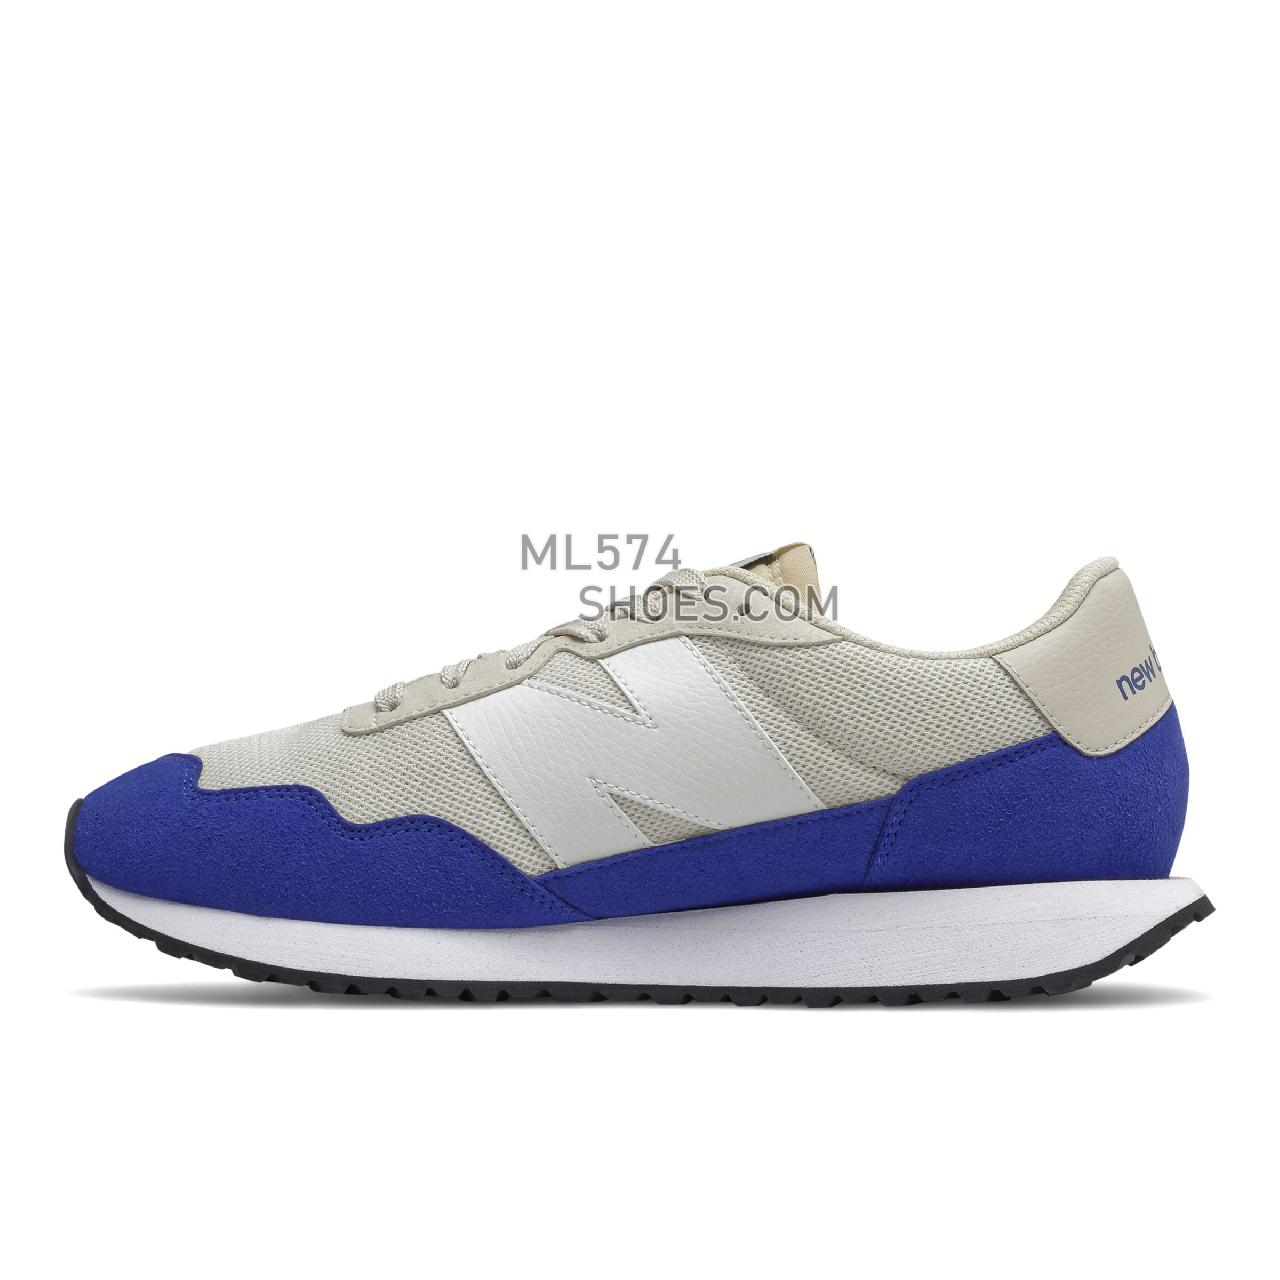 New Balance 237 - Men's Sport Style Sneakers - Moonbeam with Team Royal - MS237PL1